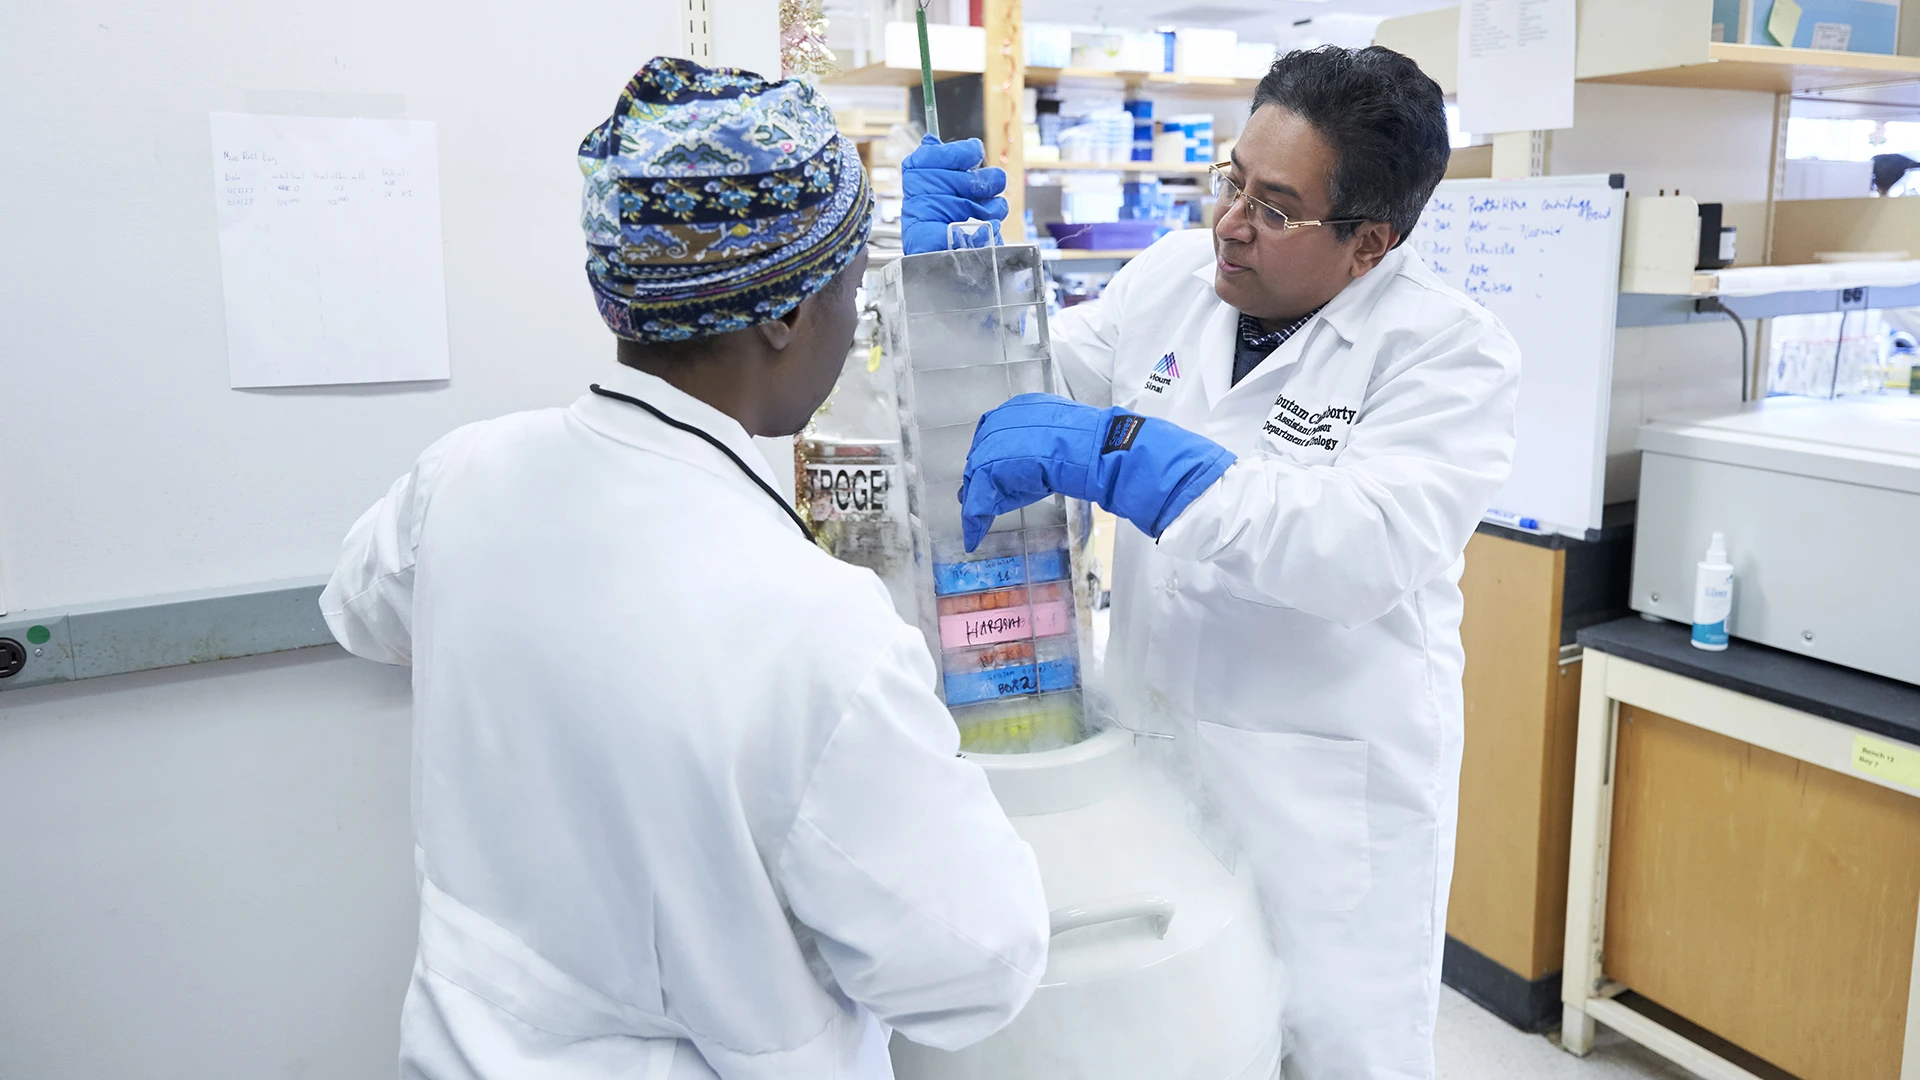 One of the latest developments from Dr. Chakraborty's (right) lab is exploring using poly (ADP-ribose) polymerase (PARP) inhibitors in combination with prostate-specific membrane antigen (PSMA) targeted therapy for BRCA2-positive metastatic castration-resistant prostate cancer. This was spurred by findings that BRCA2 mutant cells appear to have higher genomic instability, and prostate cancer of this subtypes may be more likely to respond to immunotherapies.